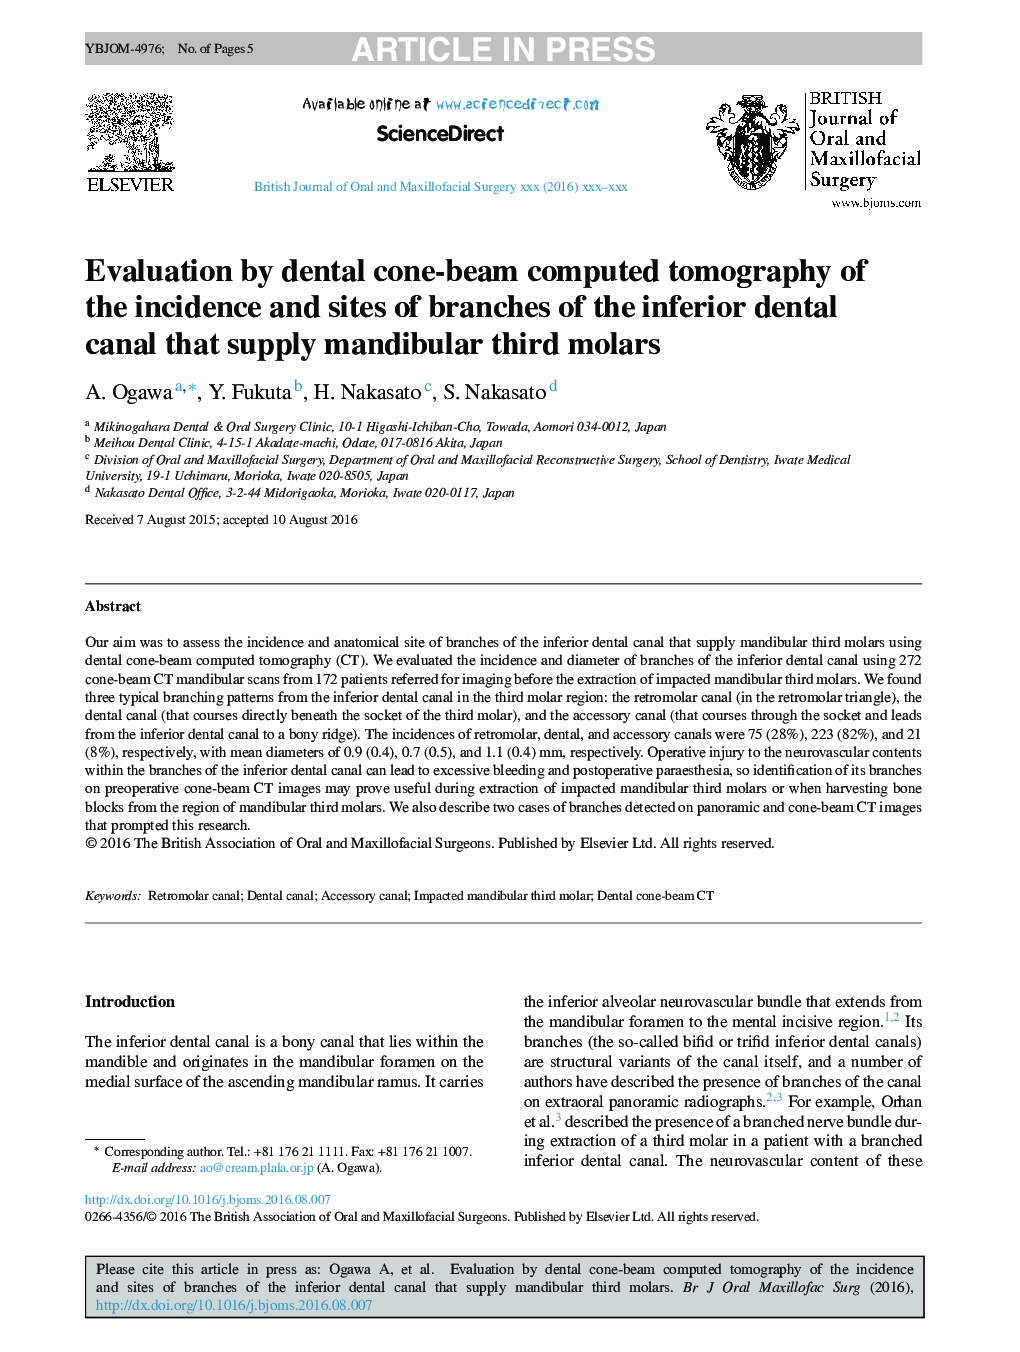 Evaluation by dental cone-beam computed tomography of the incidence and sites of branches of the inferior dental canal that supply mandibular third molars